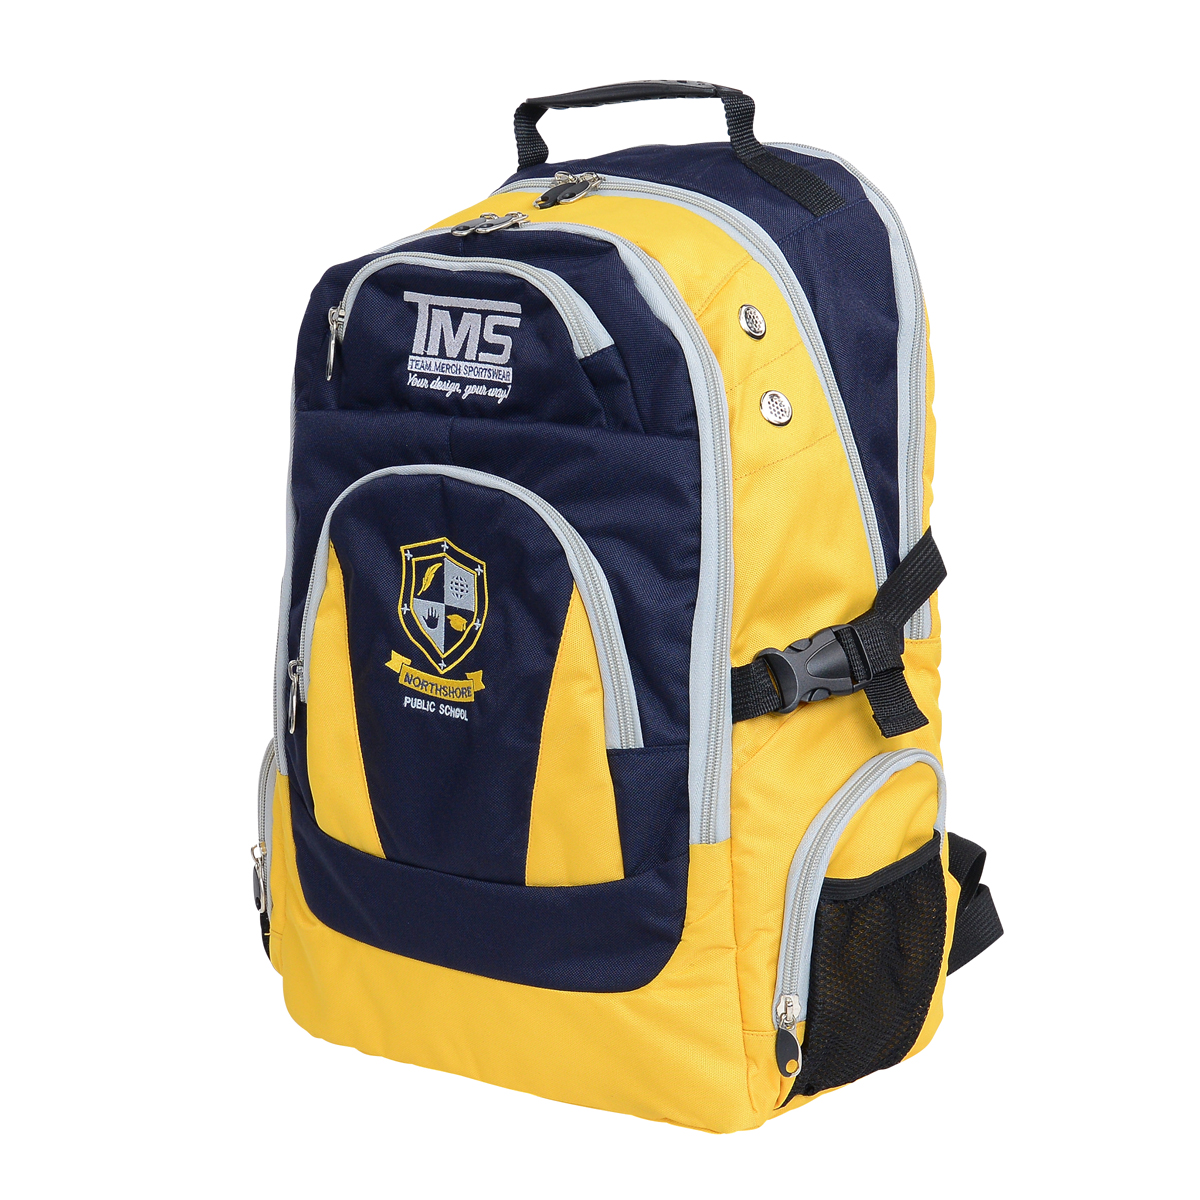 TMS Pro Backpack